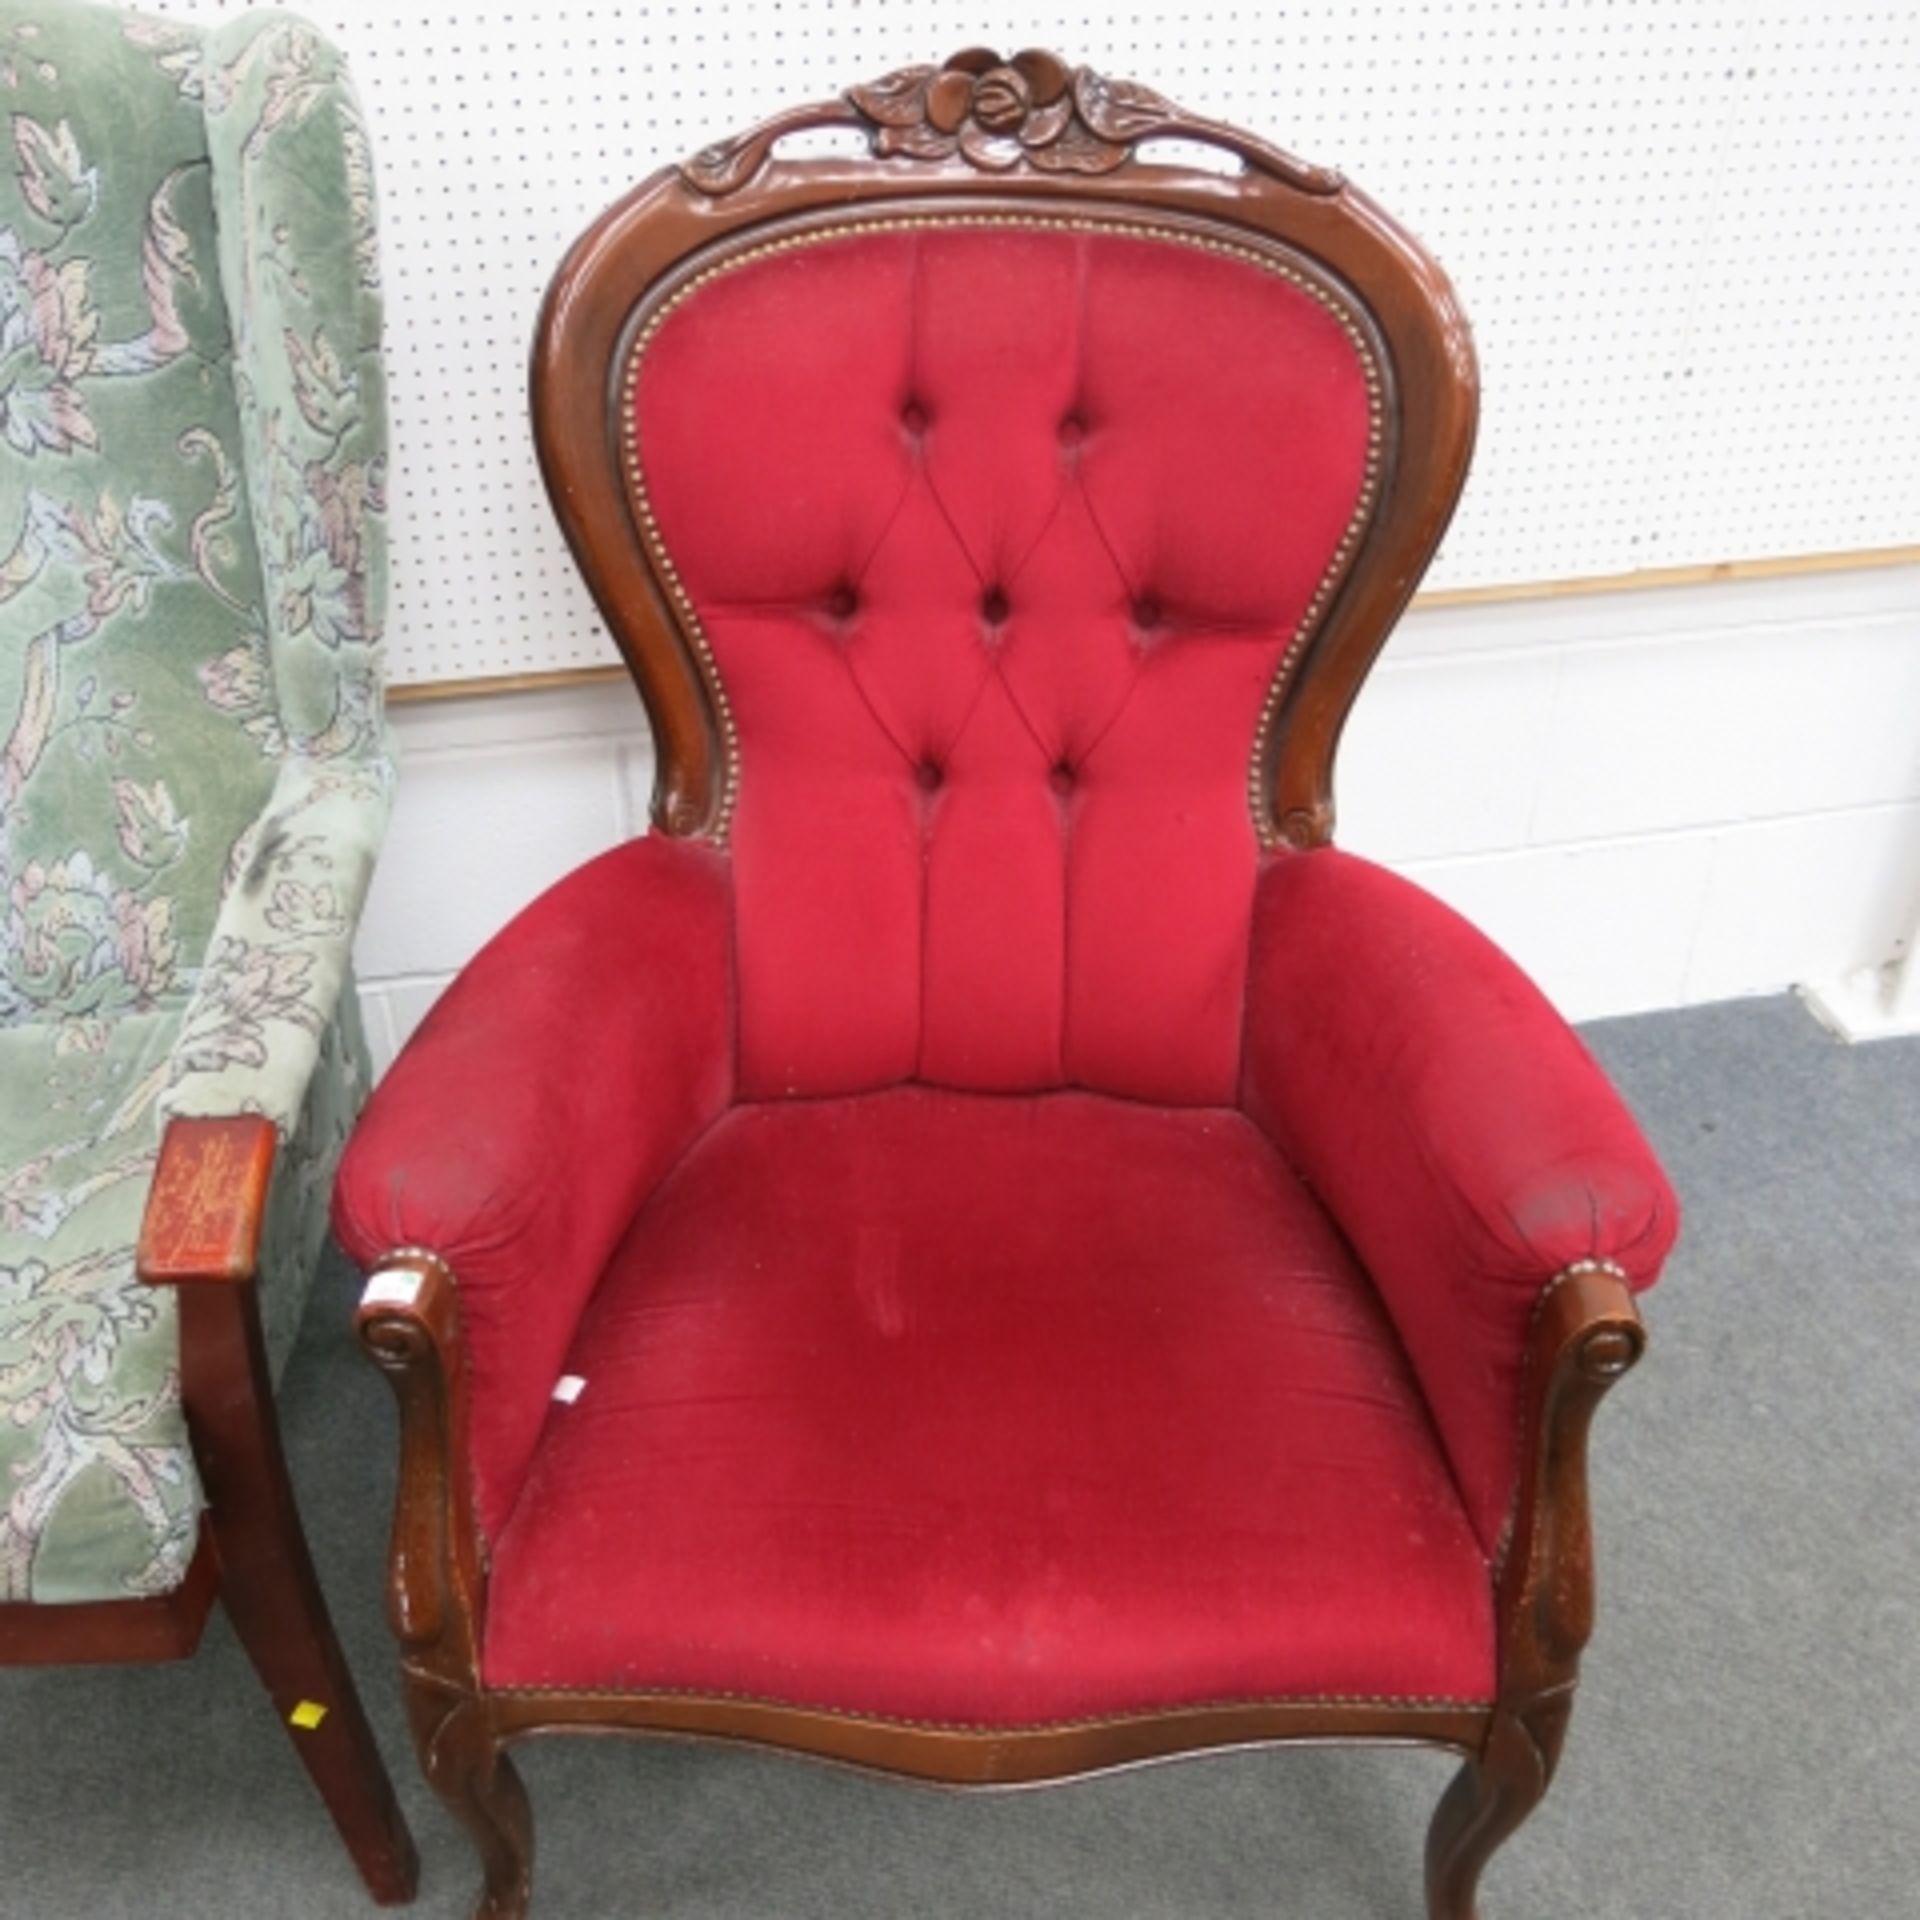 A Victorian style spoon back armchair together with a wing back fireside chair (2) (est. £30-£50) - Image 3 of 5